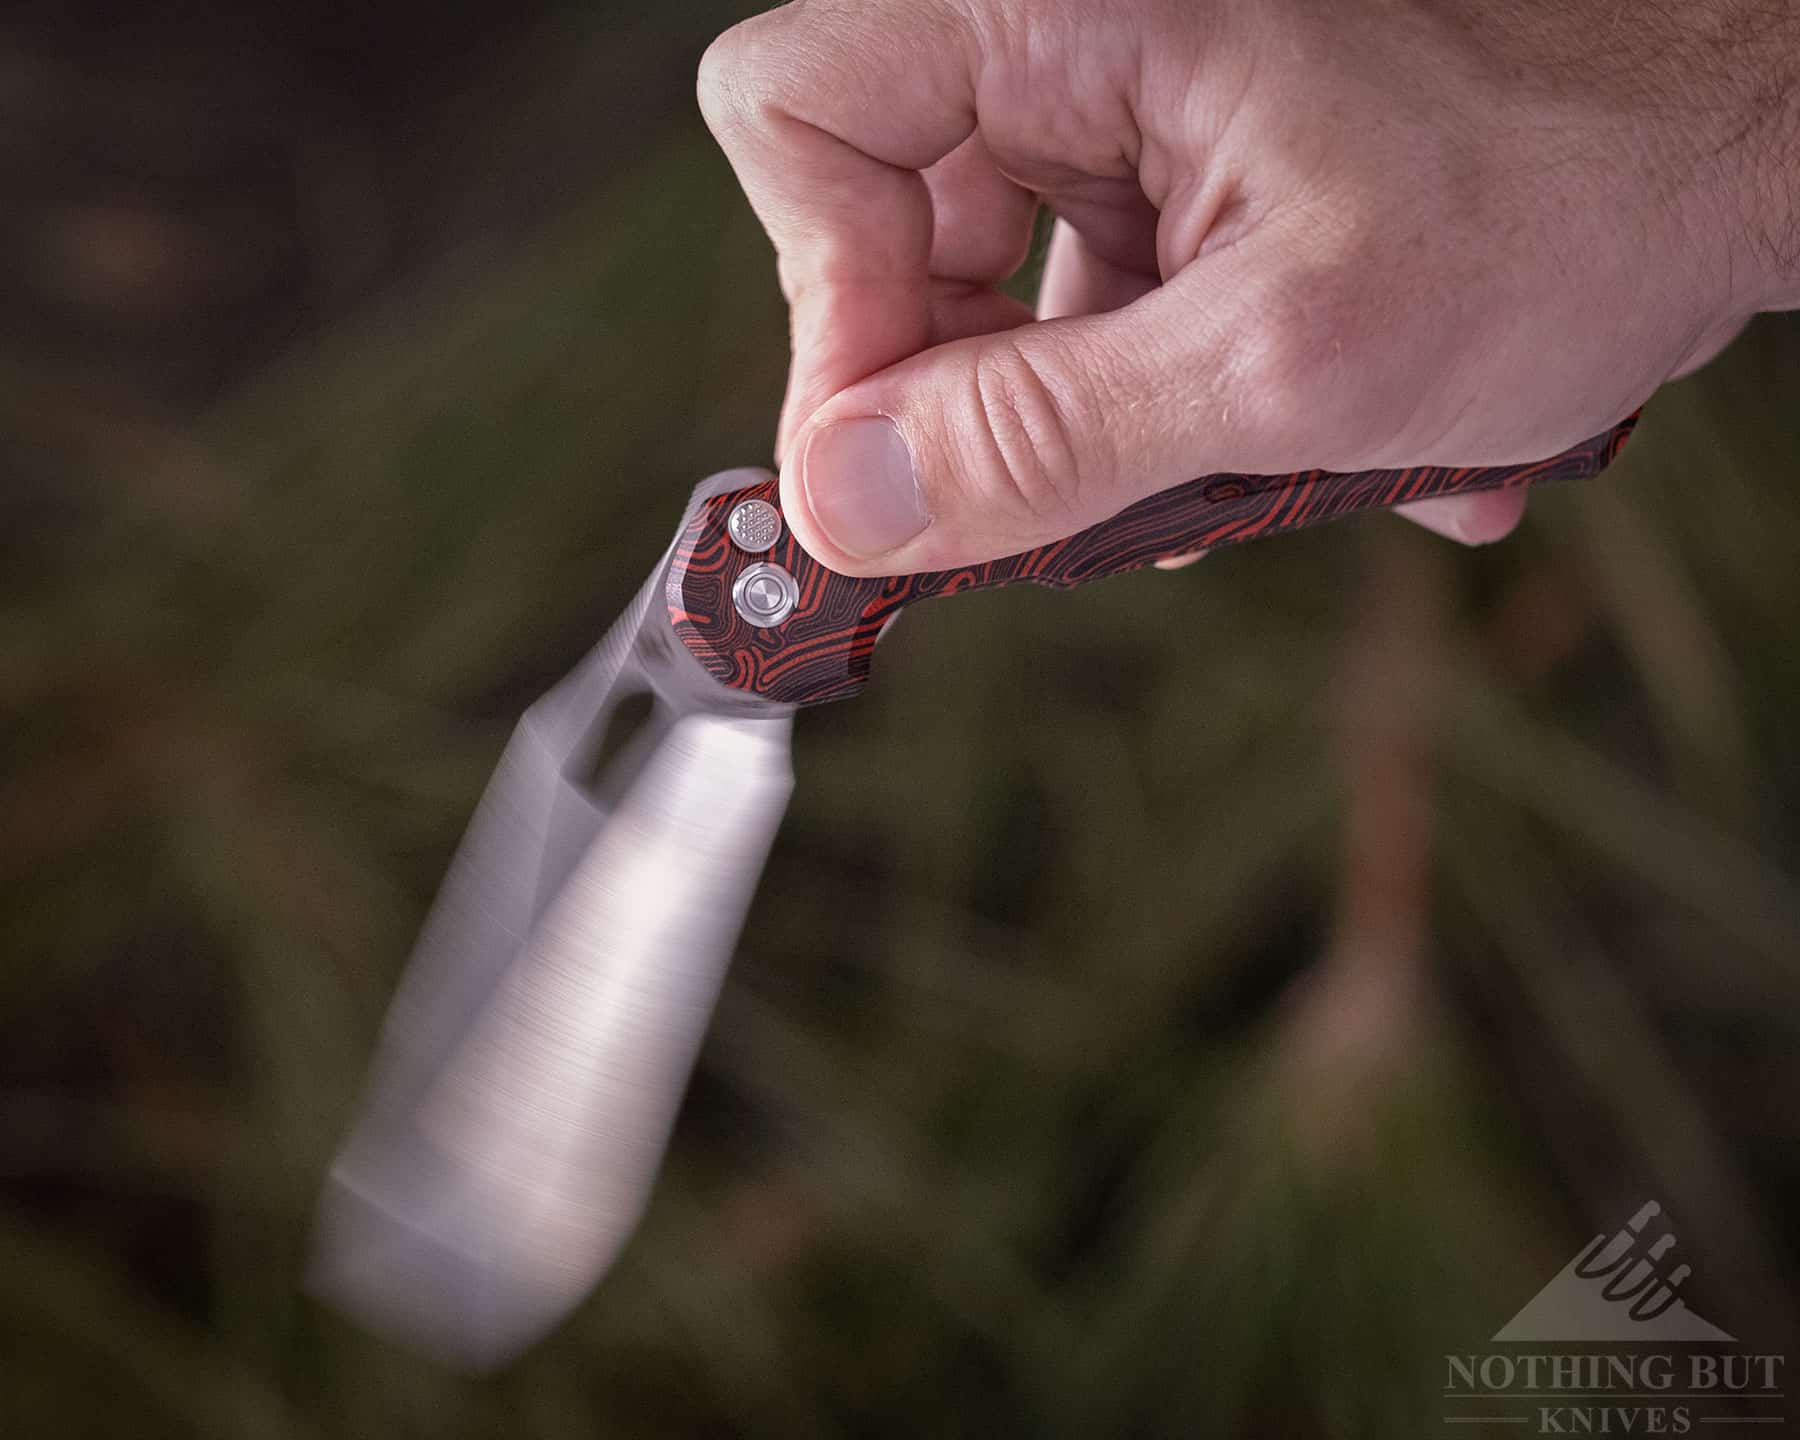 The Thunderbird has a conventional flipper tab for those who prefer classic opening methods.